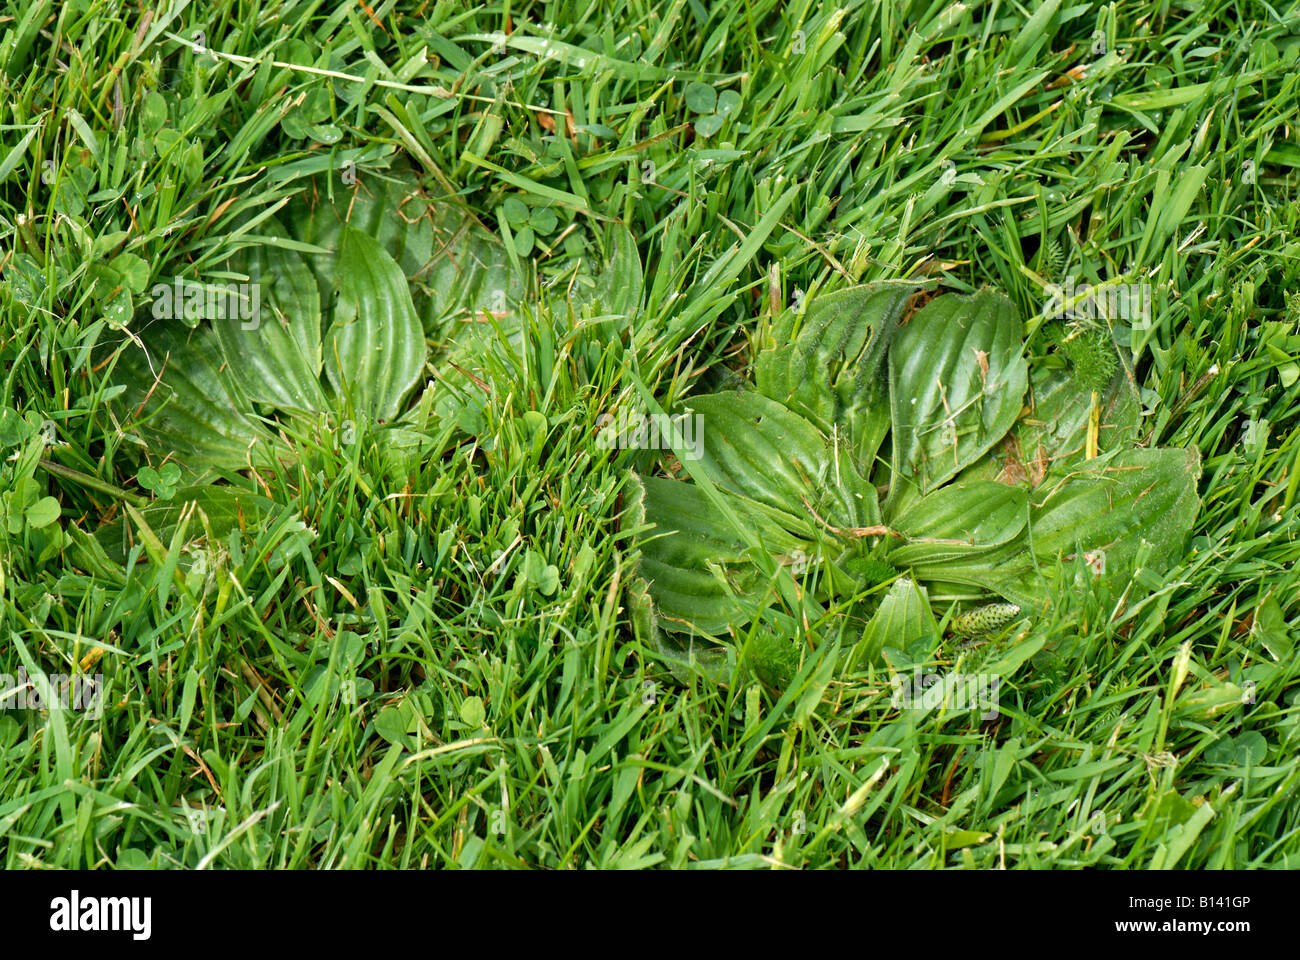 Leaf rosettes of greater plantain Plantago major in a lawn Stock Photo